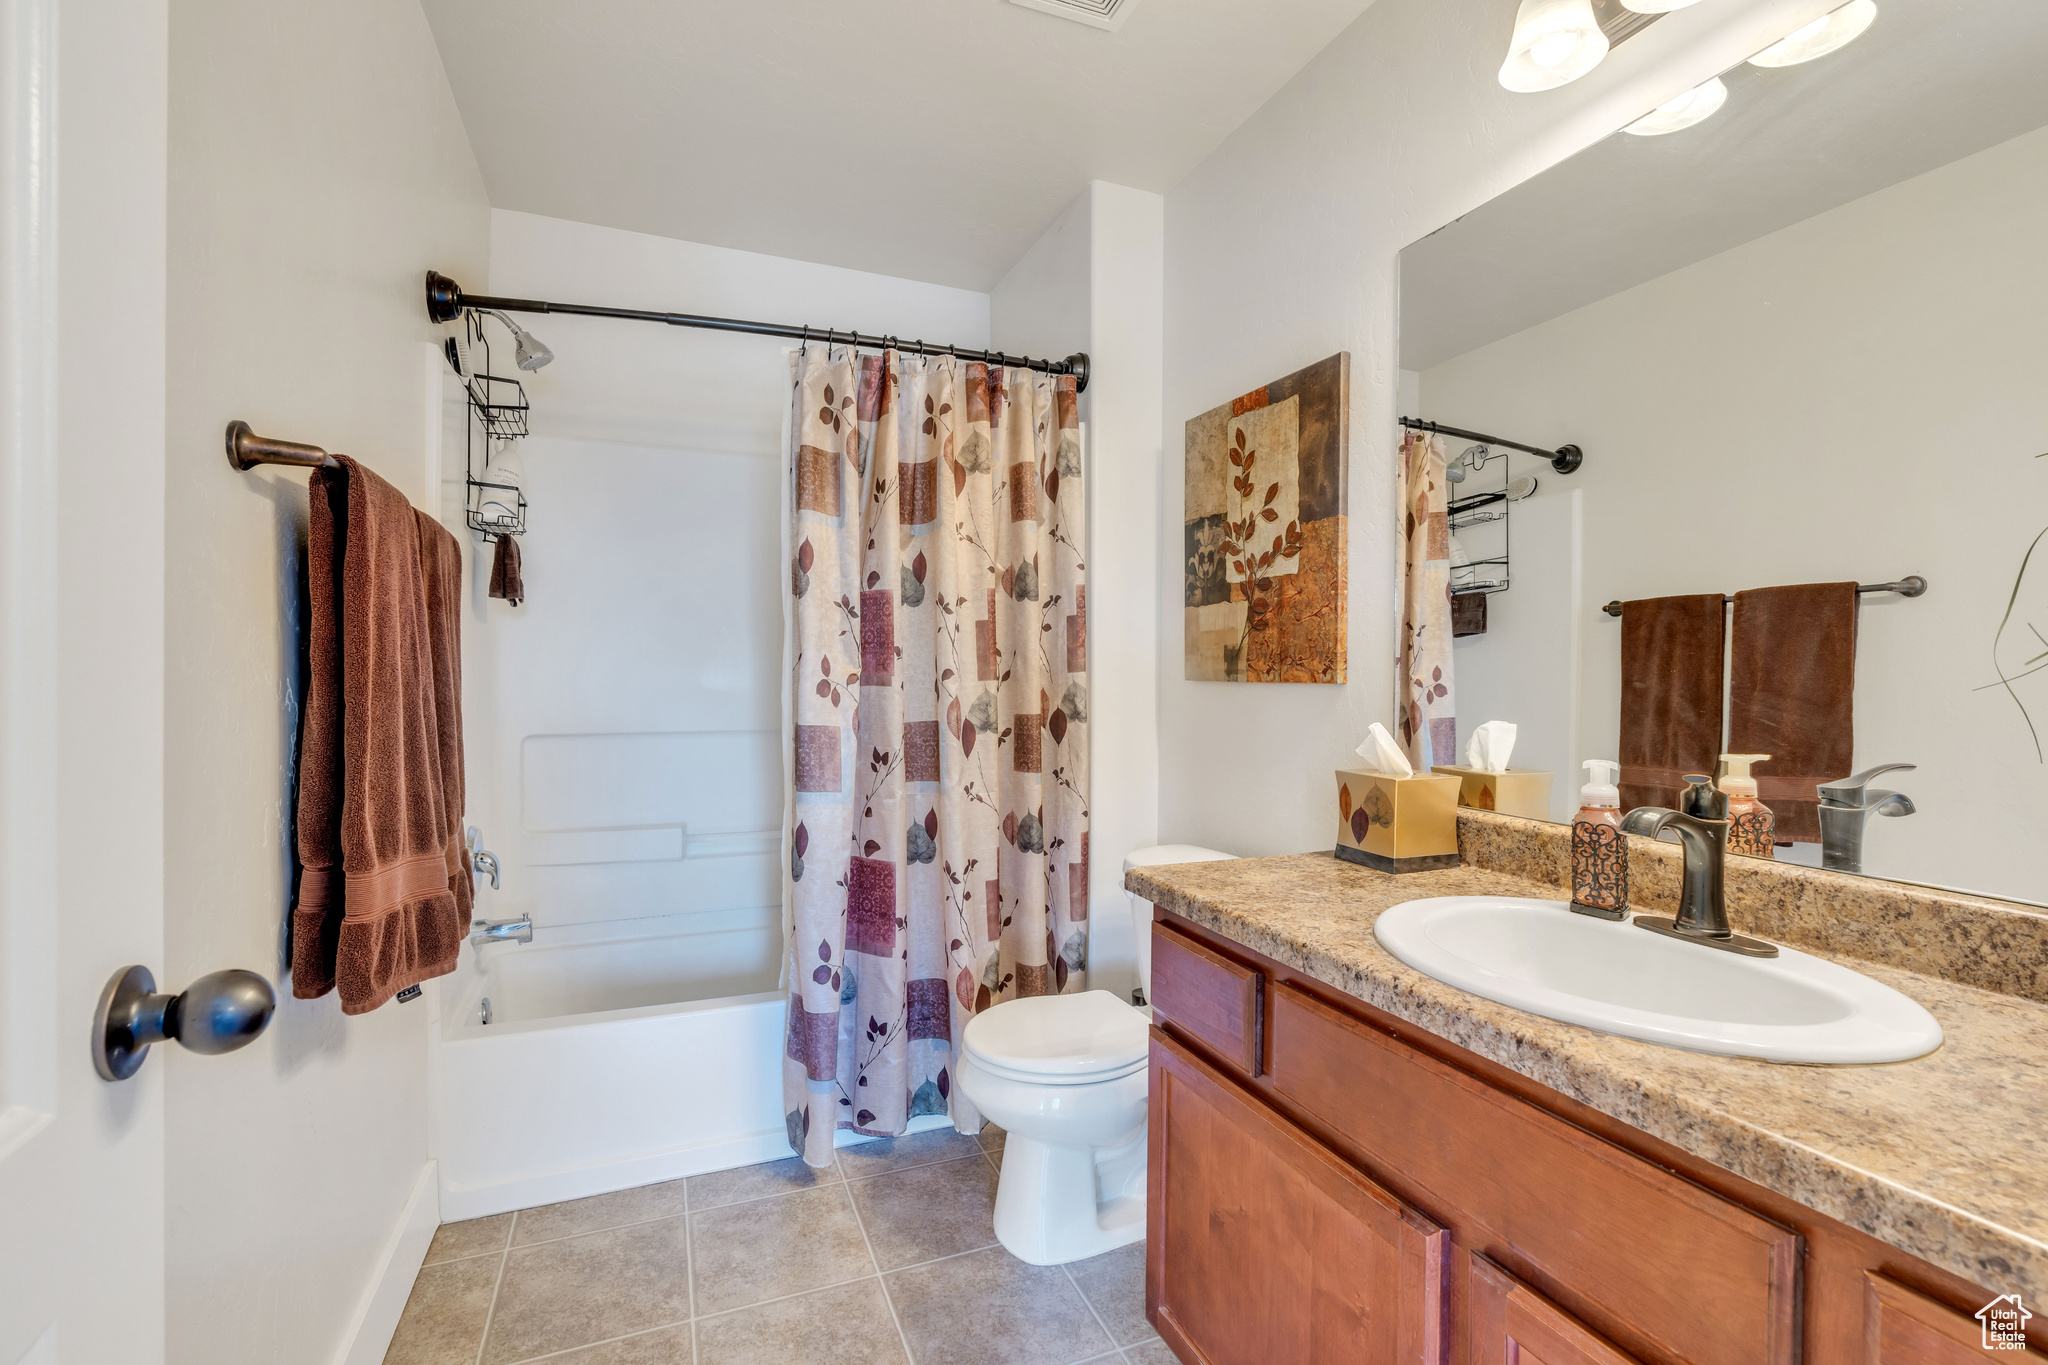 Full bathroom with shower / bathtub combination with curtain, tile flooring, vanity, and toilet